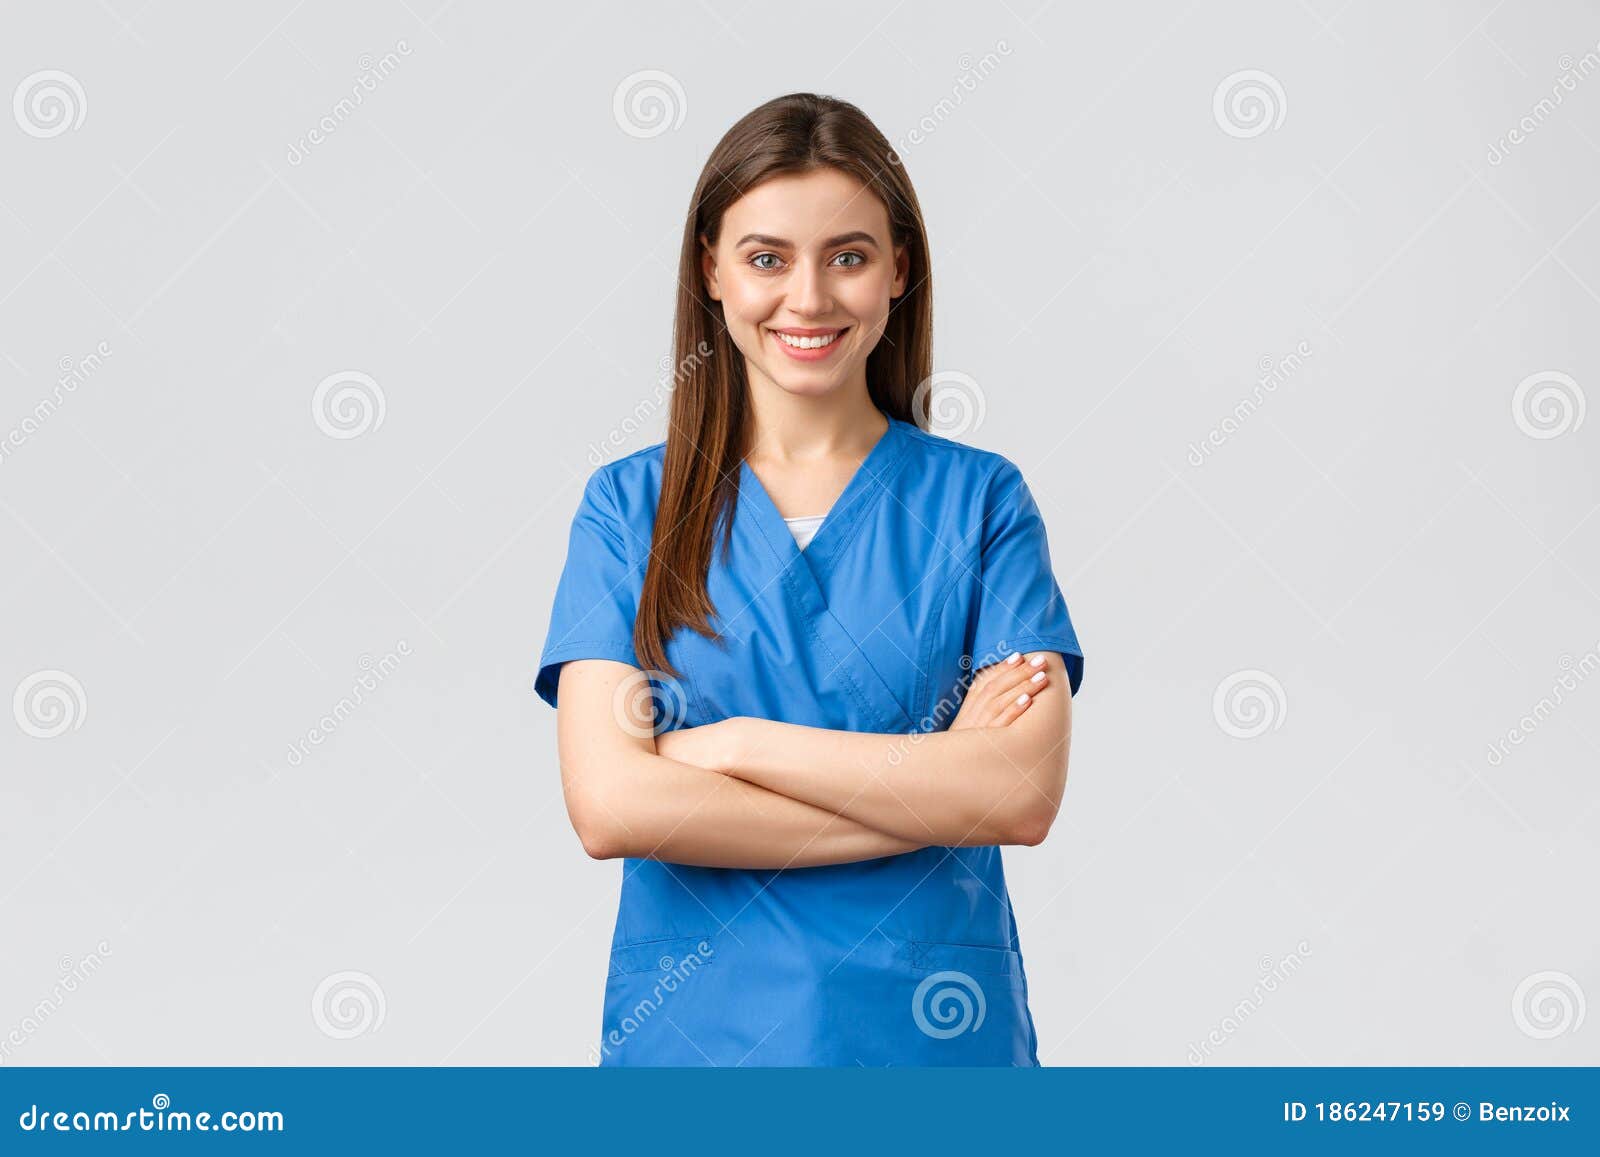 healthcare workers, prevent virus, insurance and medicine concept. confident female doctor, nurse in blue scrubs